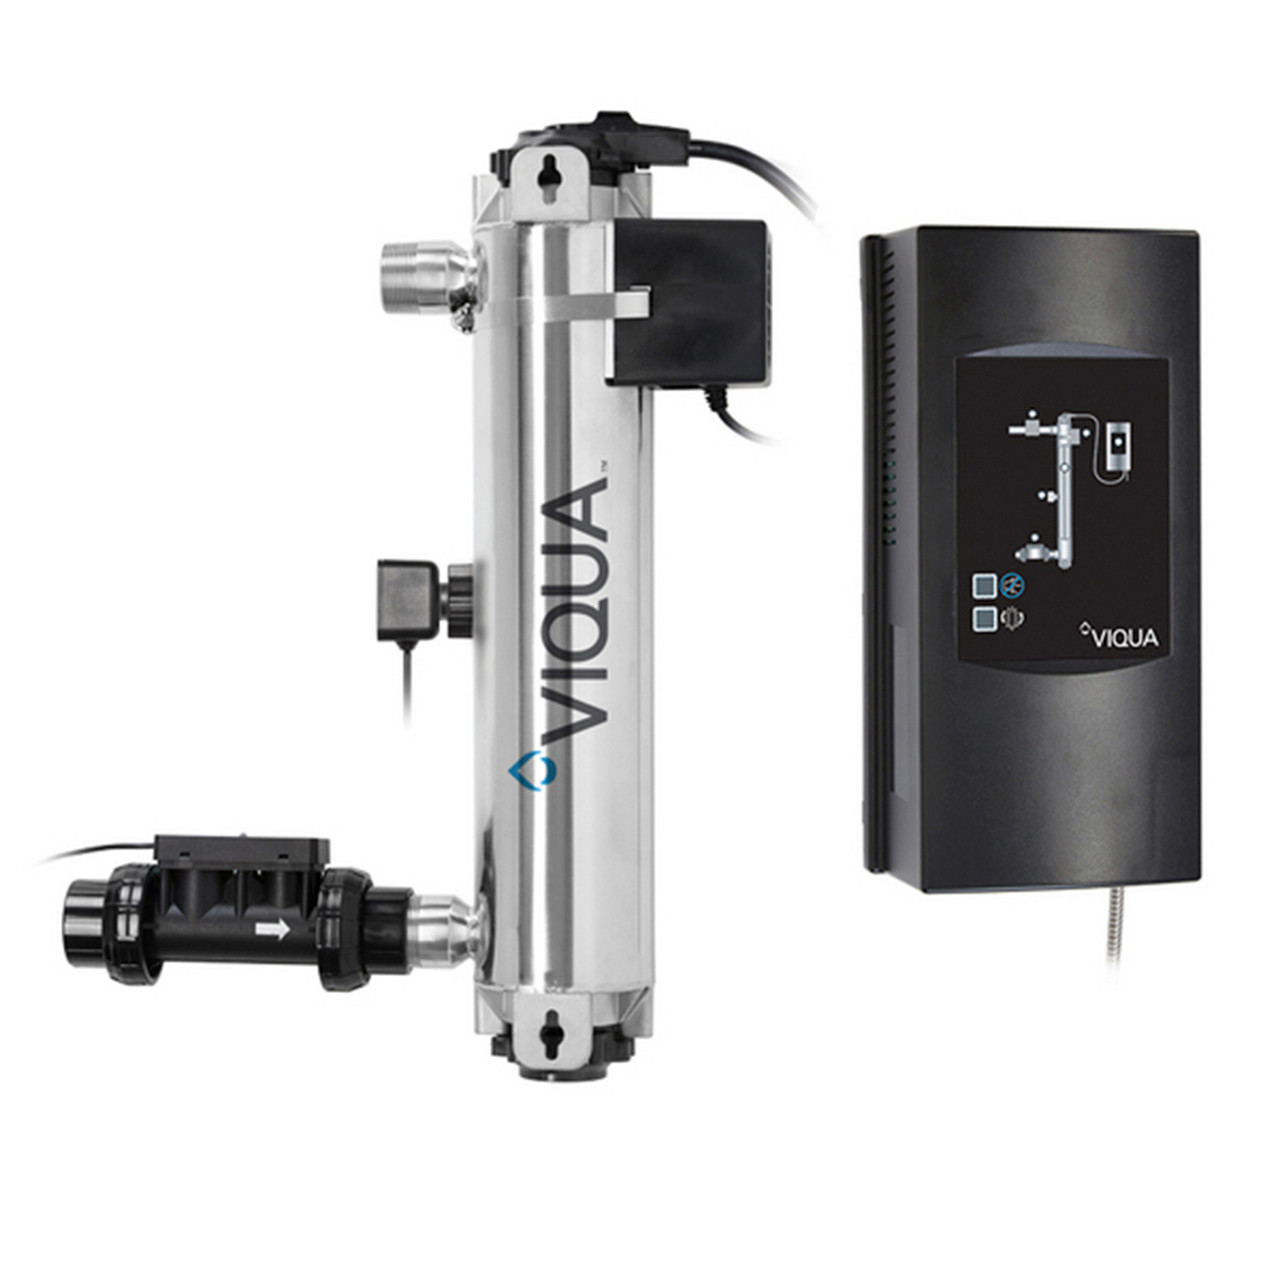  Waterspecialist 𝗨𝗞𝗙𝟴𝟬𝟬𝟭 Water Filter, Replacement for  𝗘𝘃𝗲𝗿𝘆𝗗𝗿𝗼𝗽 𝗙𝗶𝗹𝘁𝗲𝗿 𝟰, Whirlpool 𝗘𝗗𝗥𝟰𝗥𝗫𝗗𝟭, 4396395,  Wrx735sdbm00, Mfi2570fez Msd2651heb, Krfc300ess01, Pack of 3